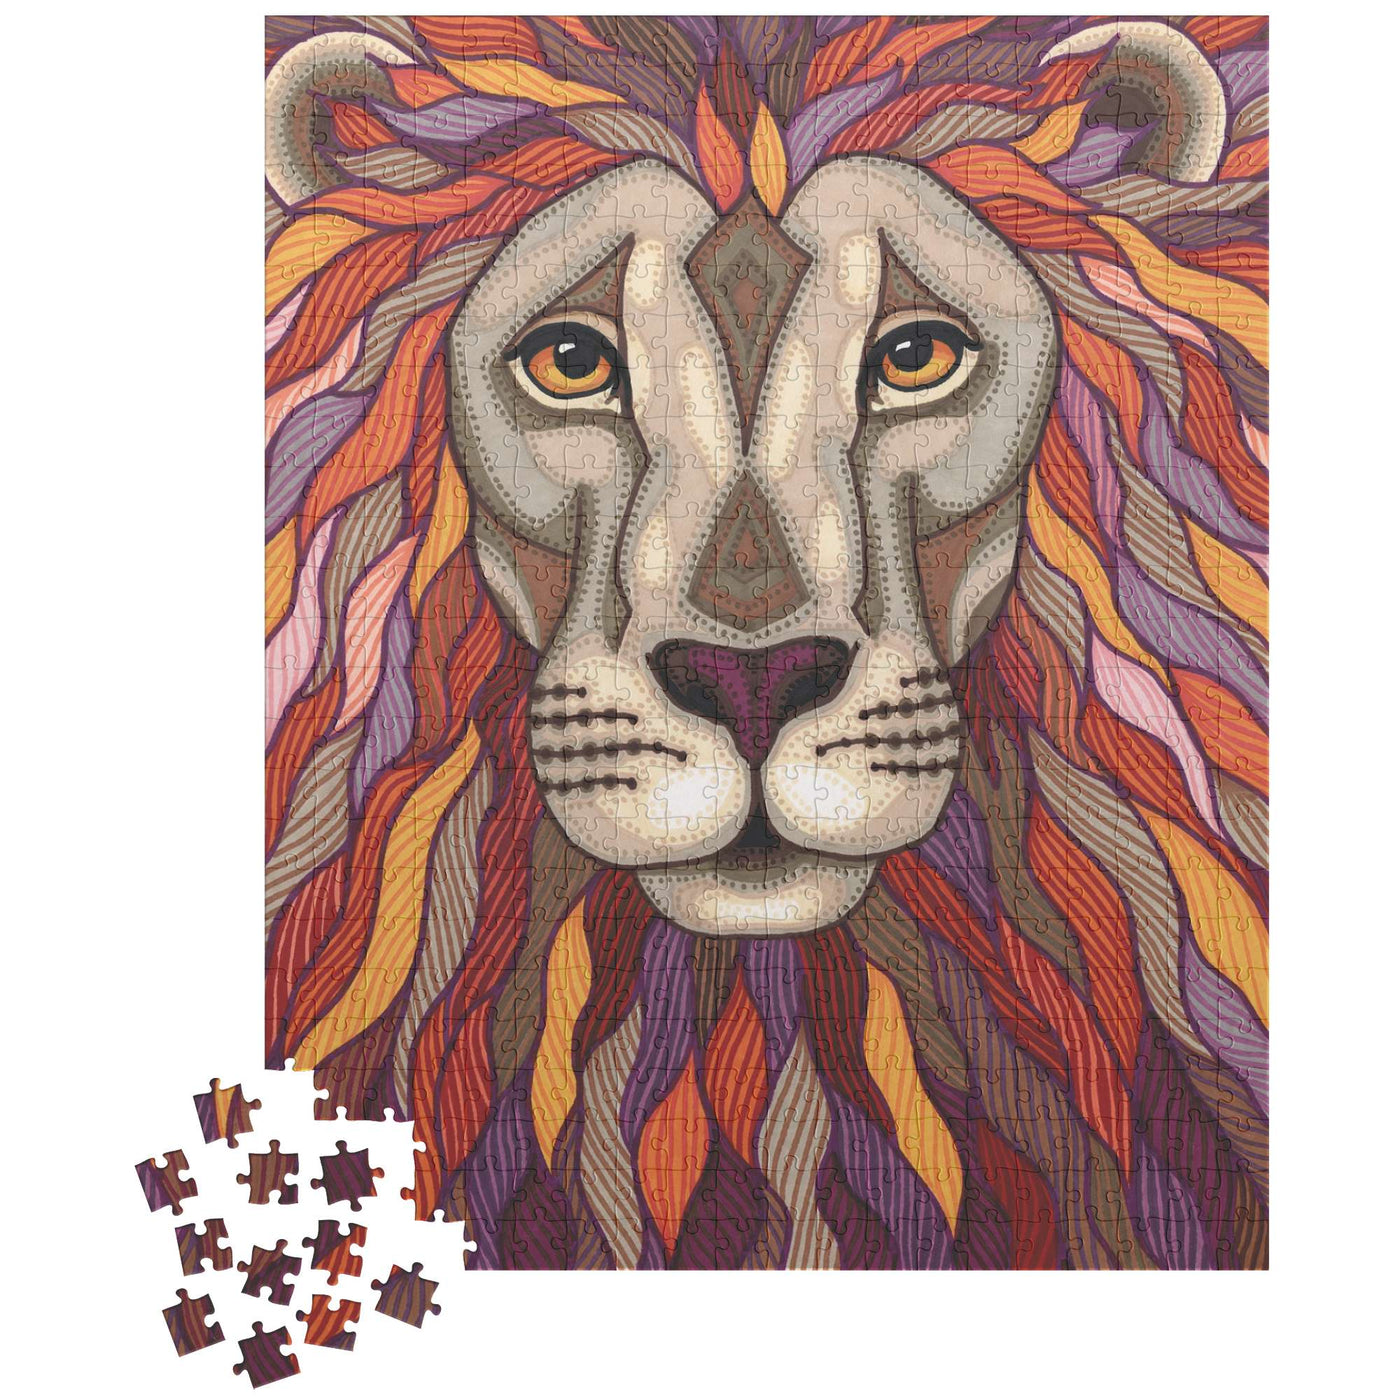 Illustration of a Lion Pride Puzzle with colorful, patterned mane, next to unassembled puzzle pieces with similar designs.